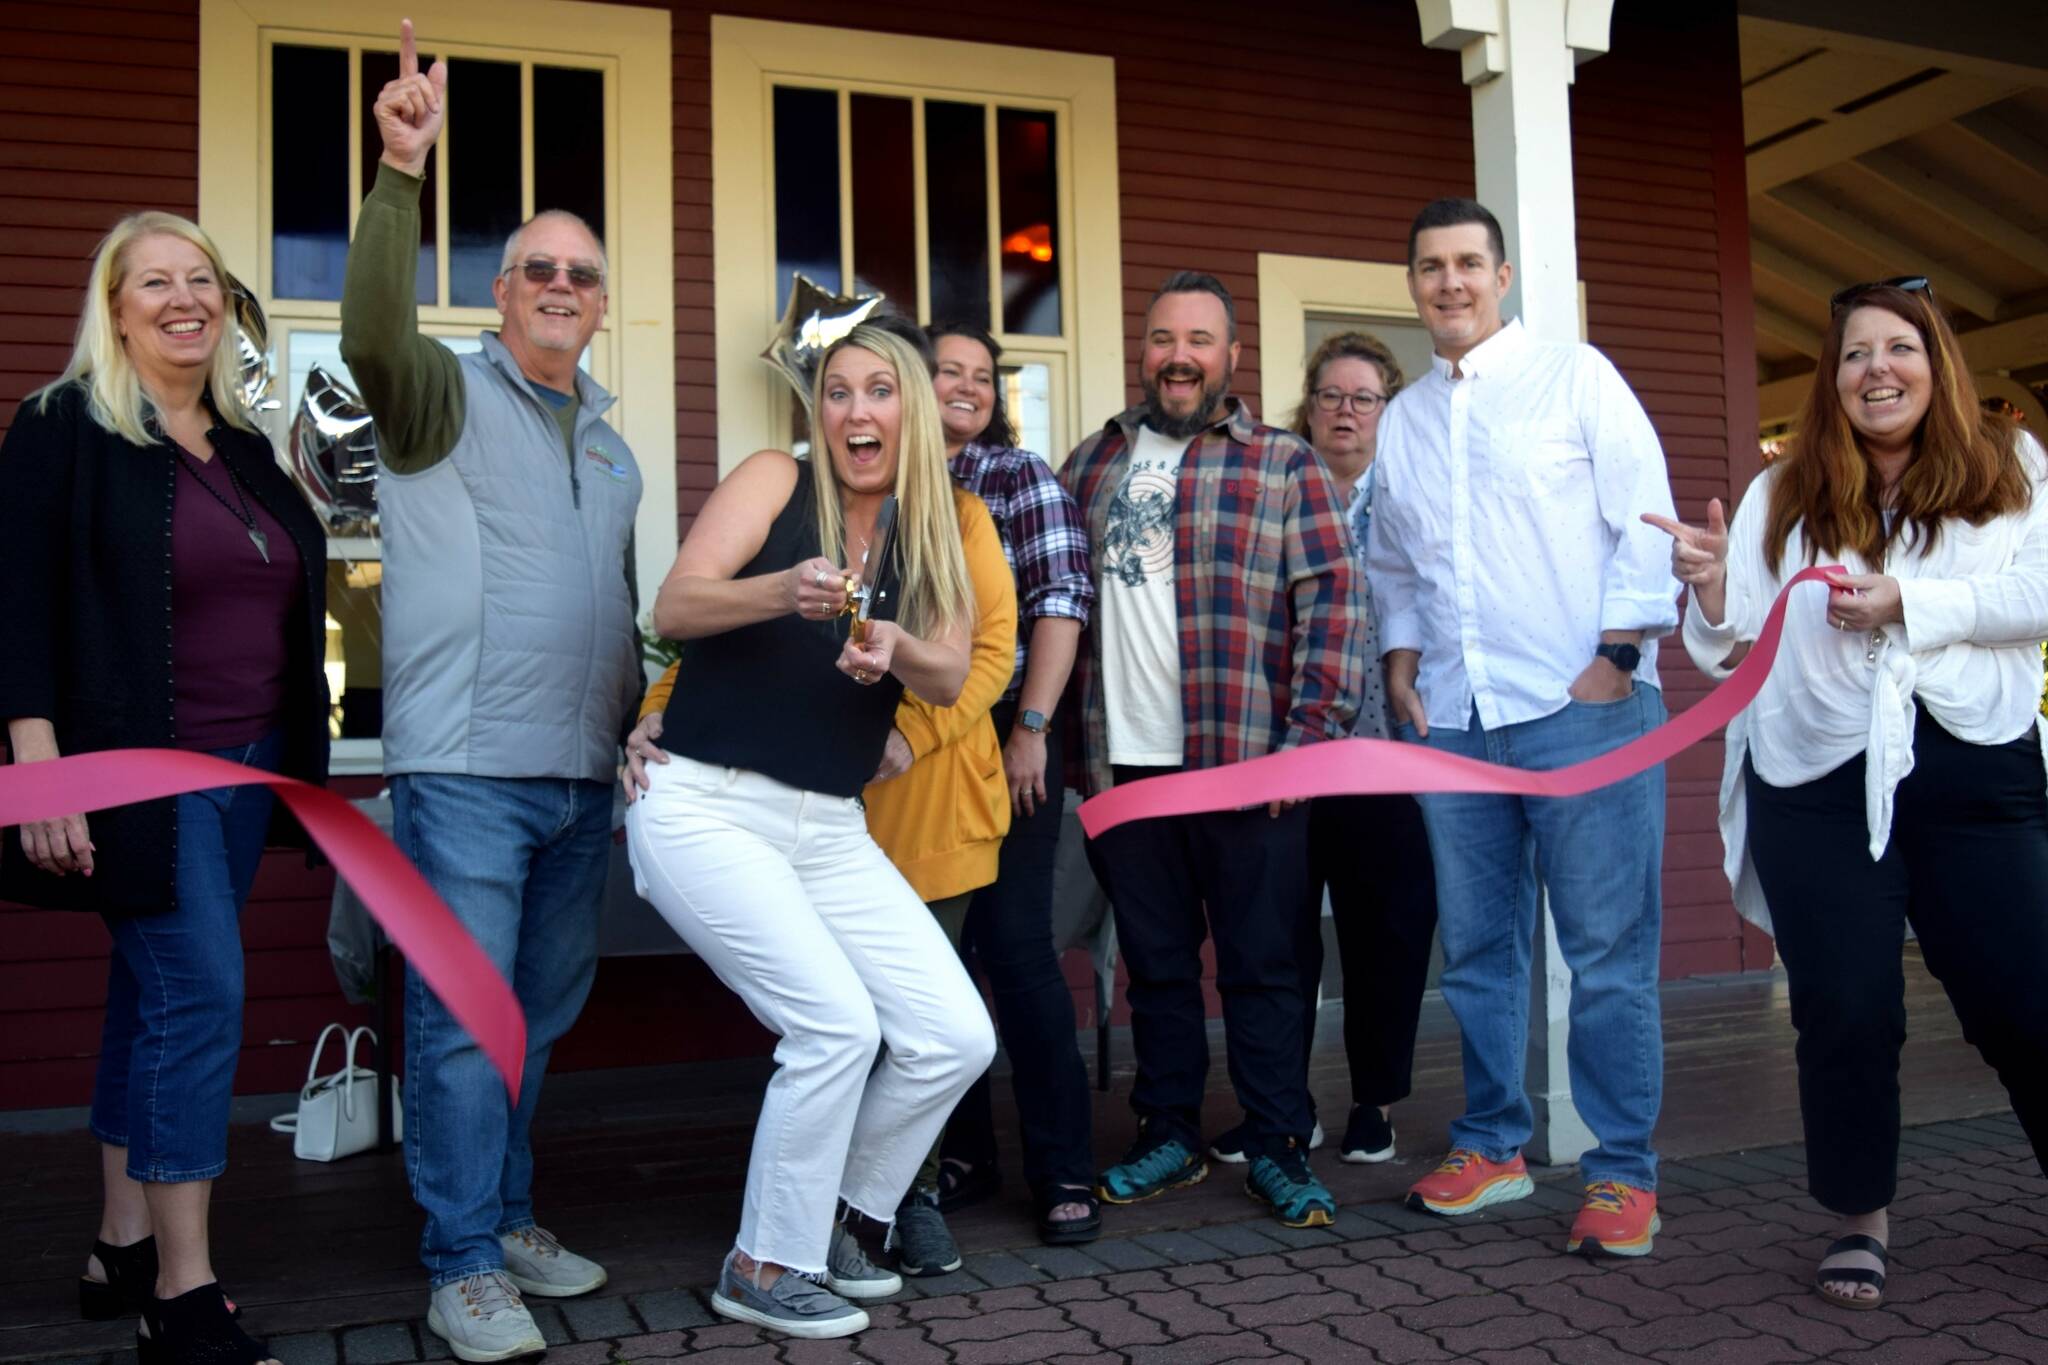 Photo by Conor Wilson/Valley Record
North Bend Downtown Foundation Board members celebrate the foundation’s new office at the North Bend Train Depot on Sept. 21. Pictured from left: Suzan Torguson, North Bend Mayor Rob McFarland, Foundation Executive Director Jessica Self, Britni Larson, Lucas Haines, Beth Burrows (back) Jason Glazier, SnoValley Chamber CEO Kelly Coughlin.